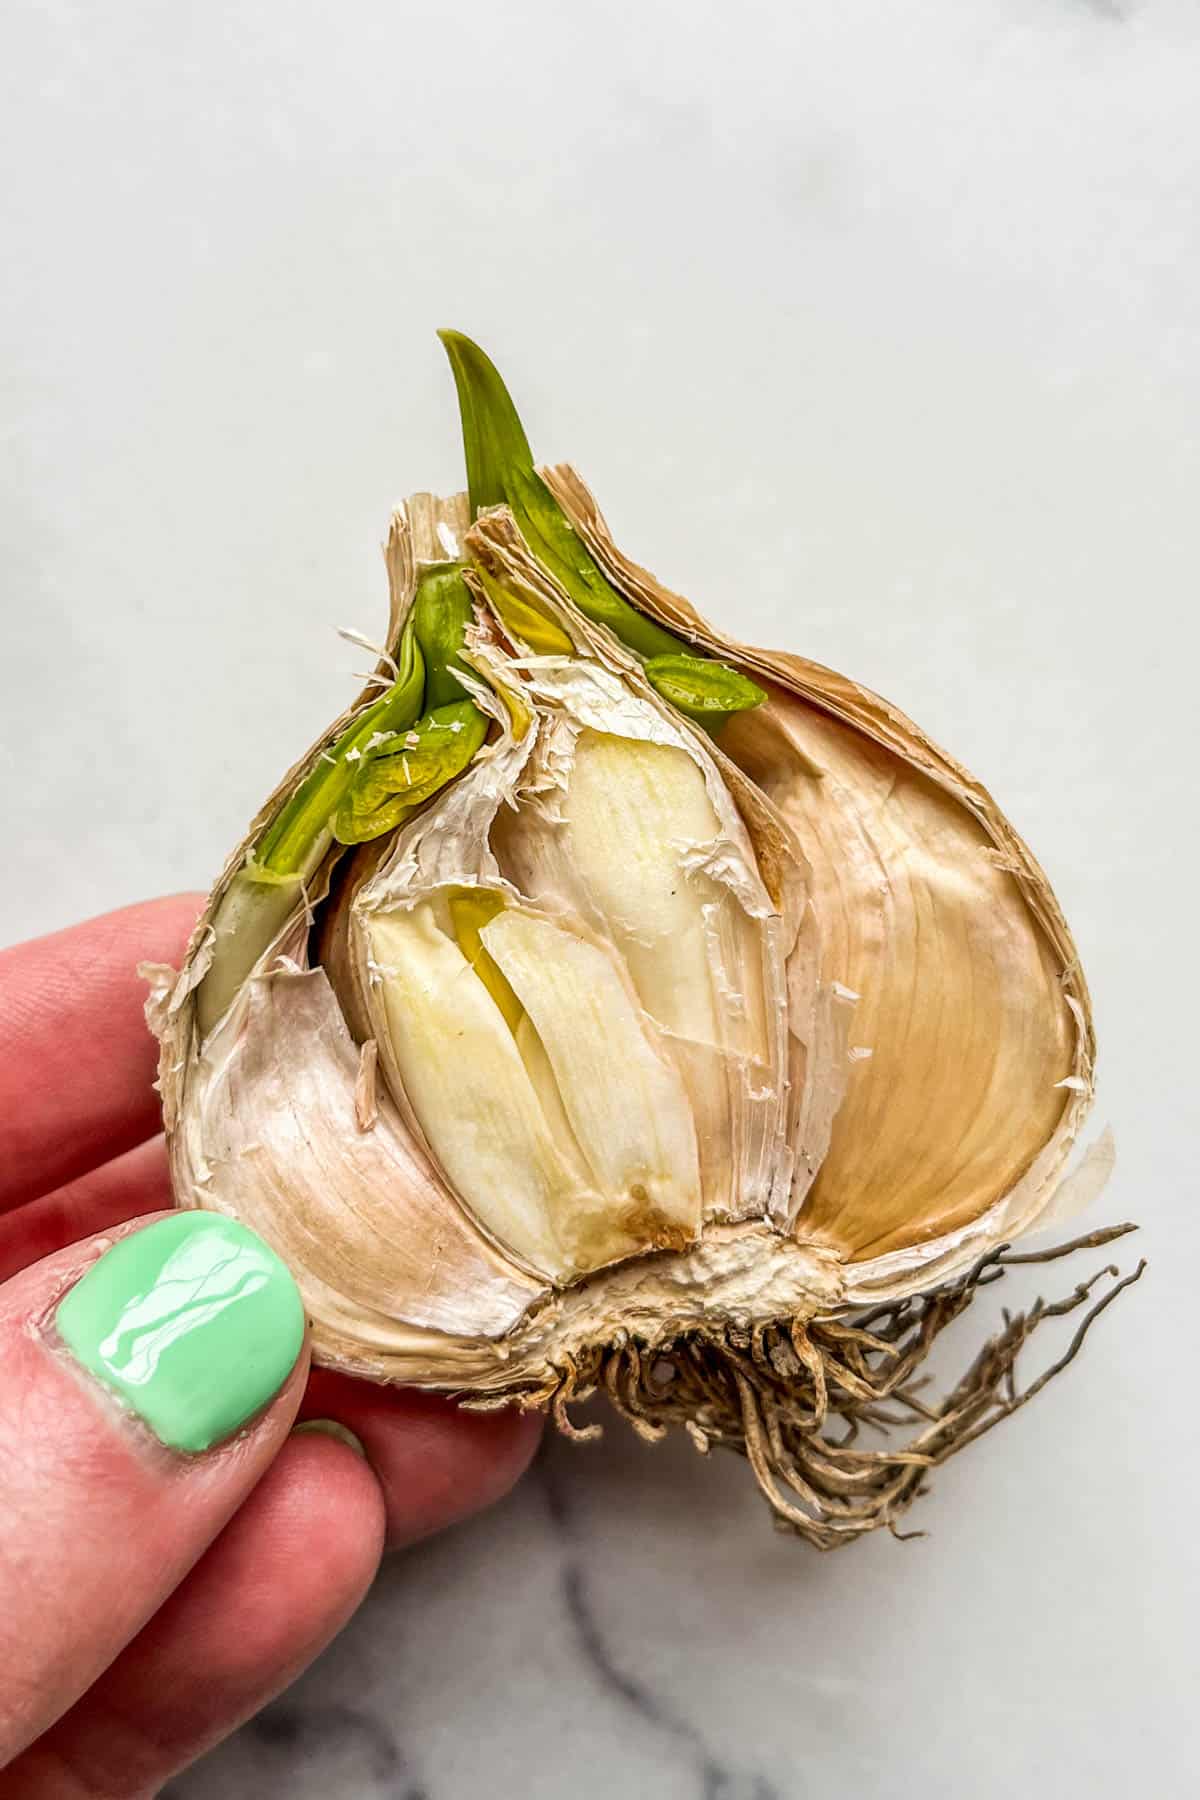 A halved head of garlic with green sprouts.